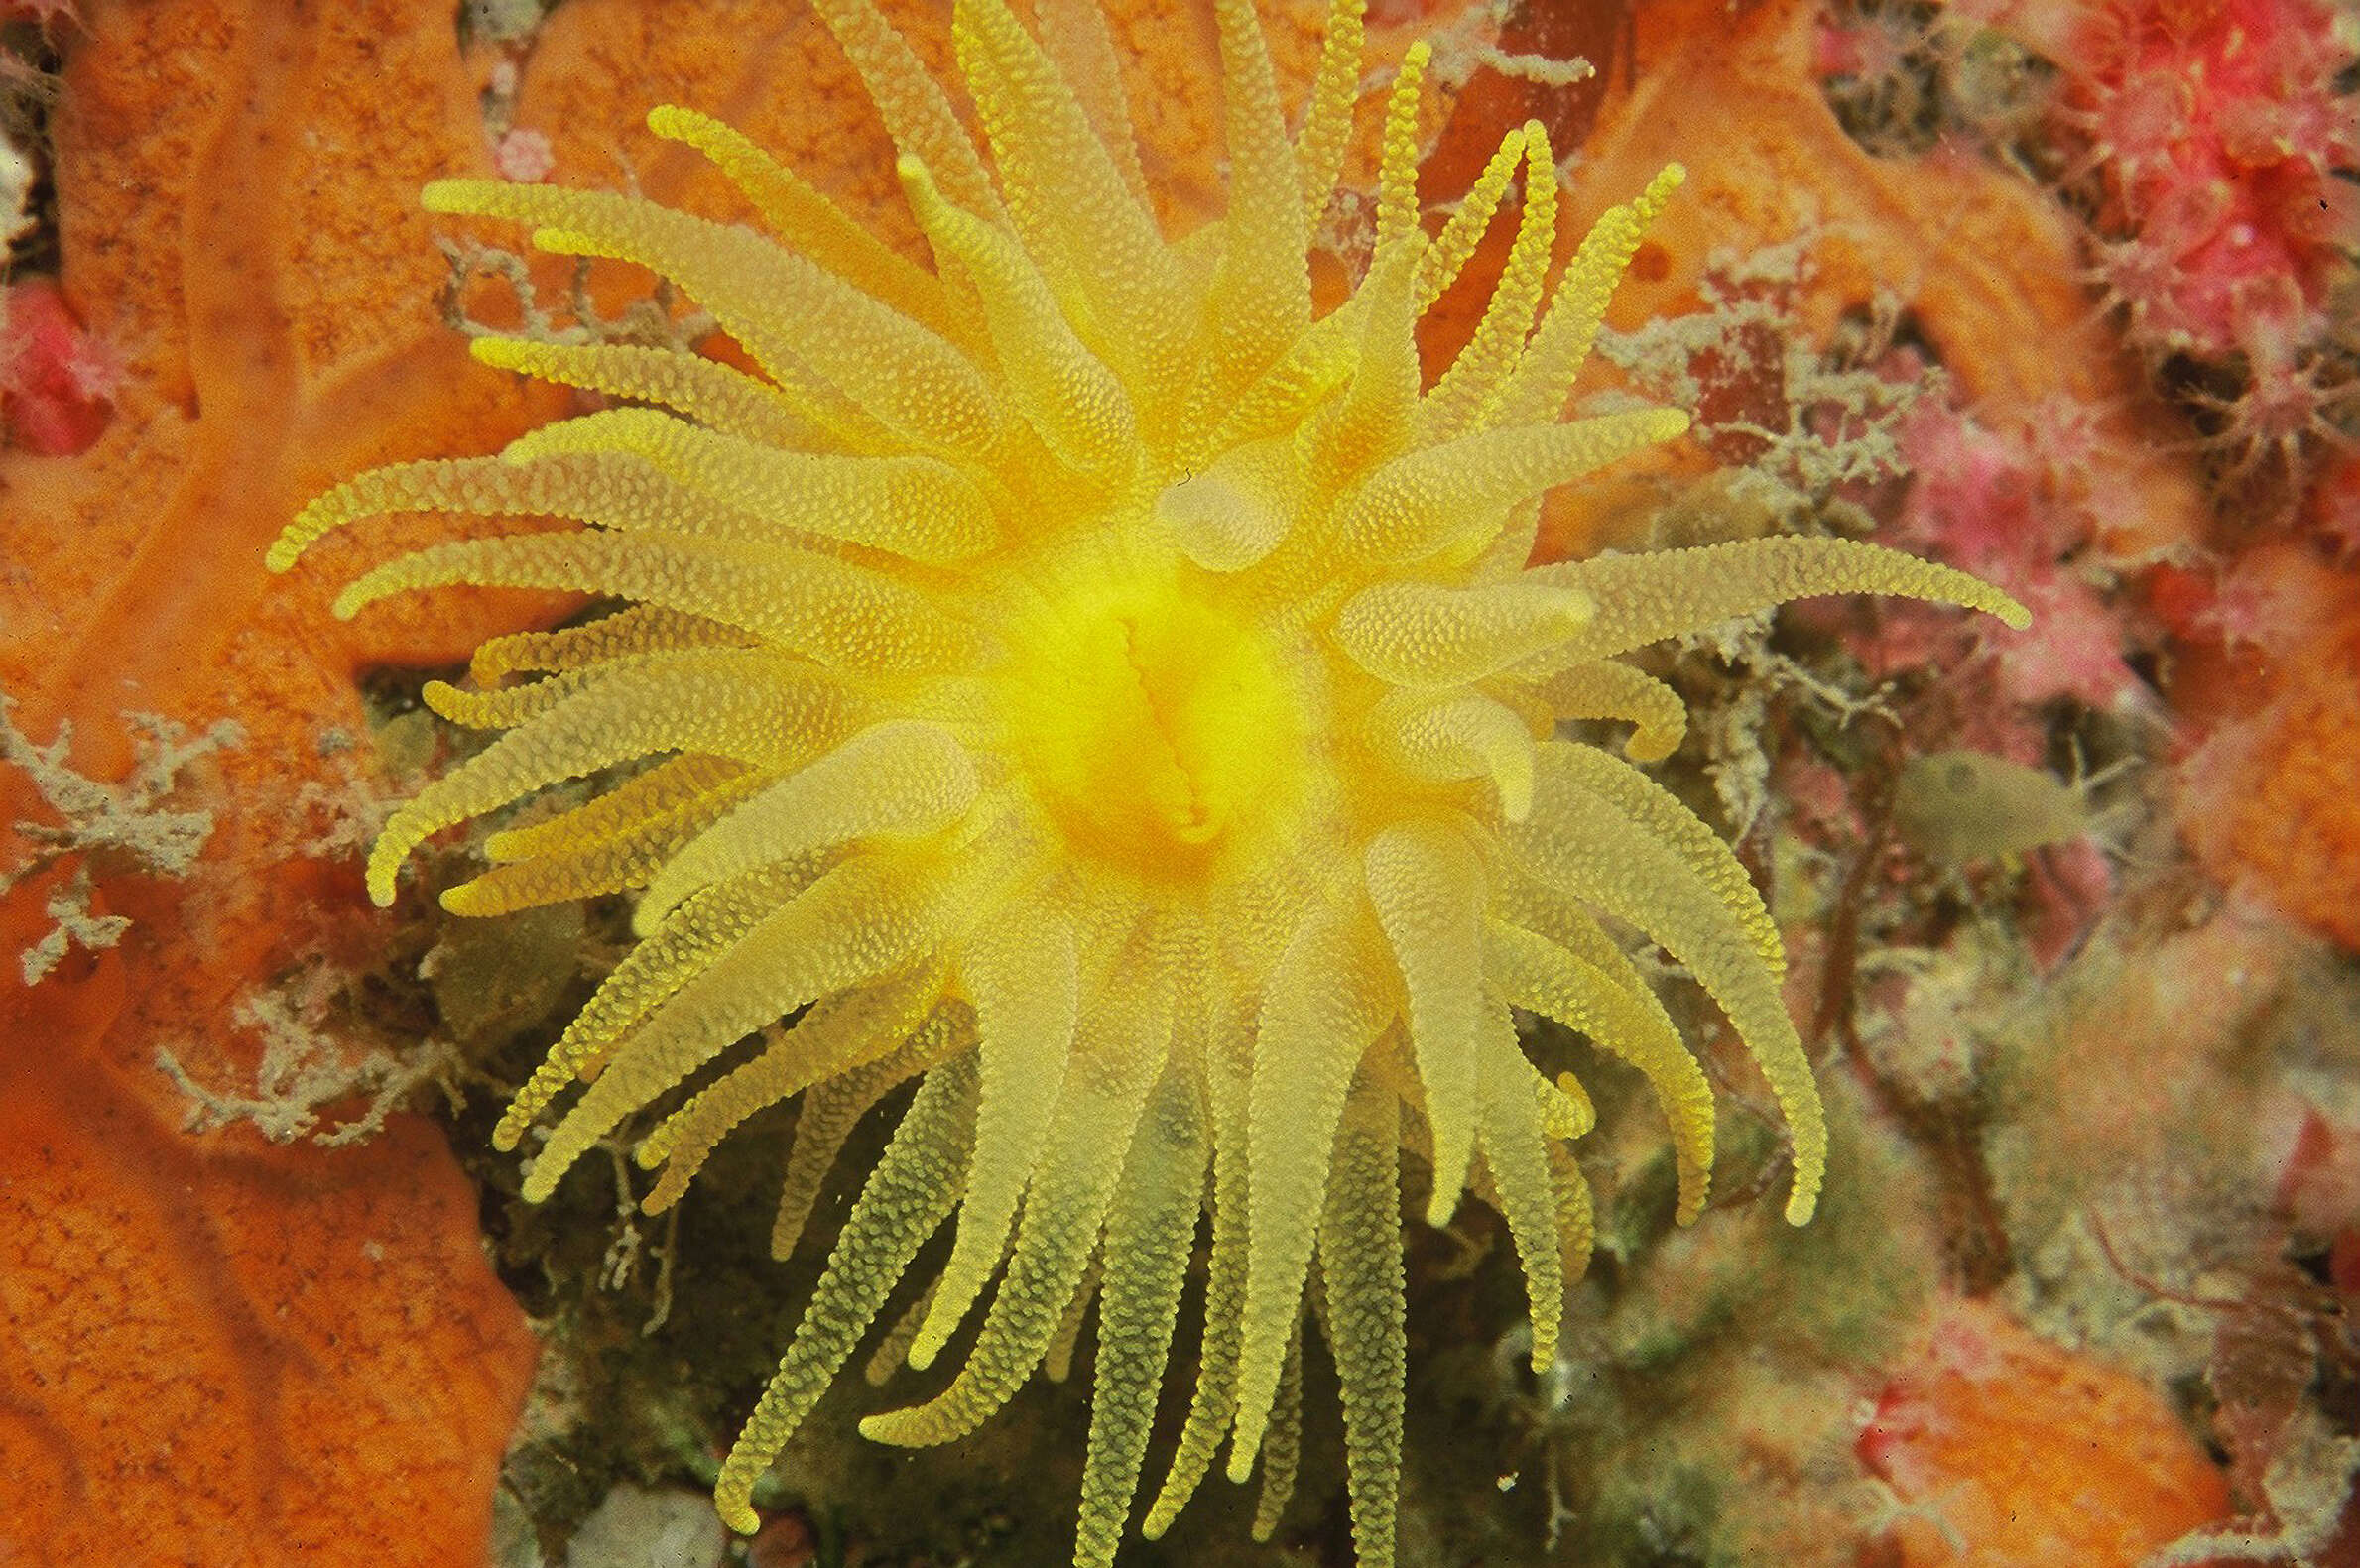 Image of cup coral